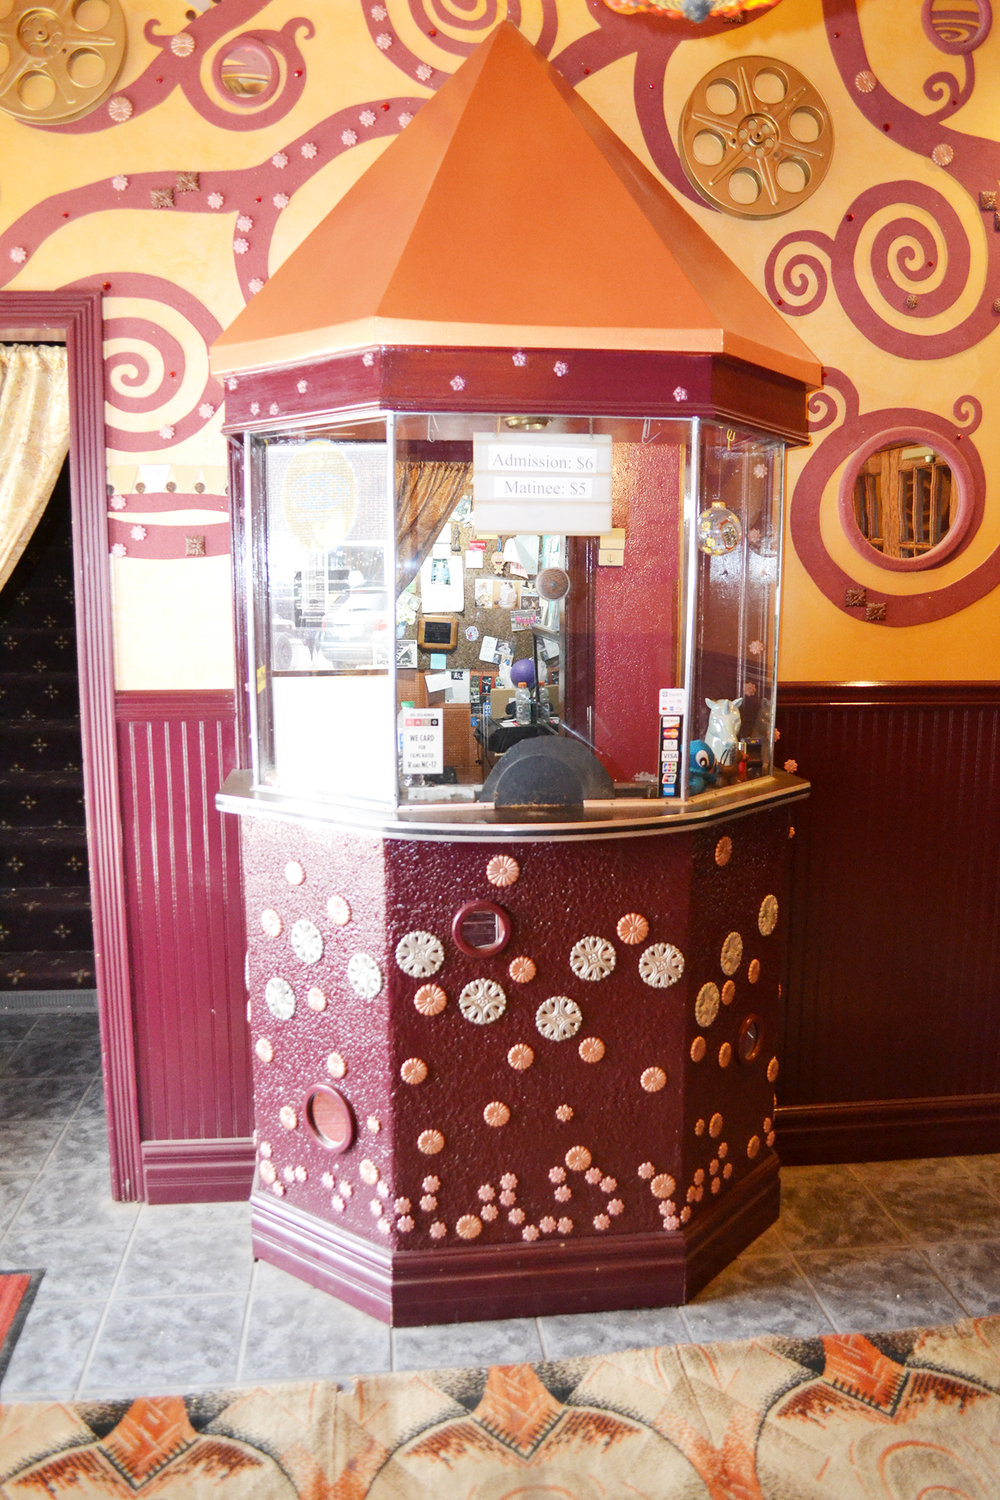 Ticket booth in the lobby